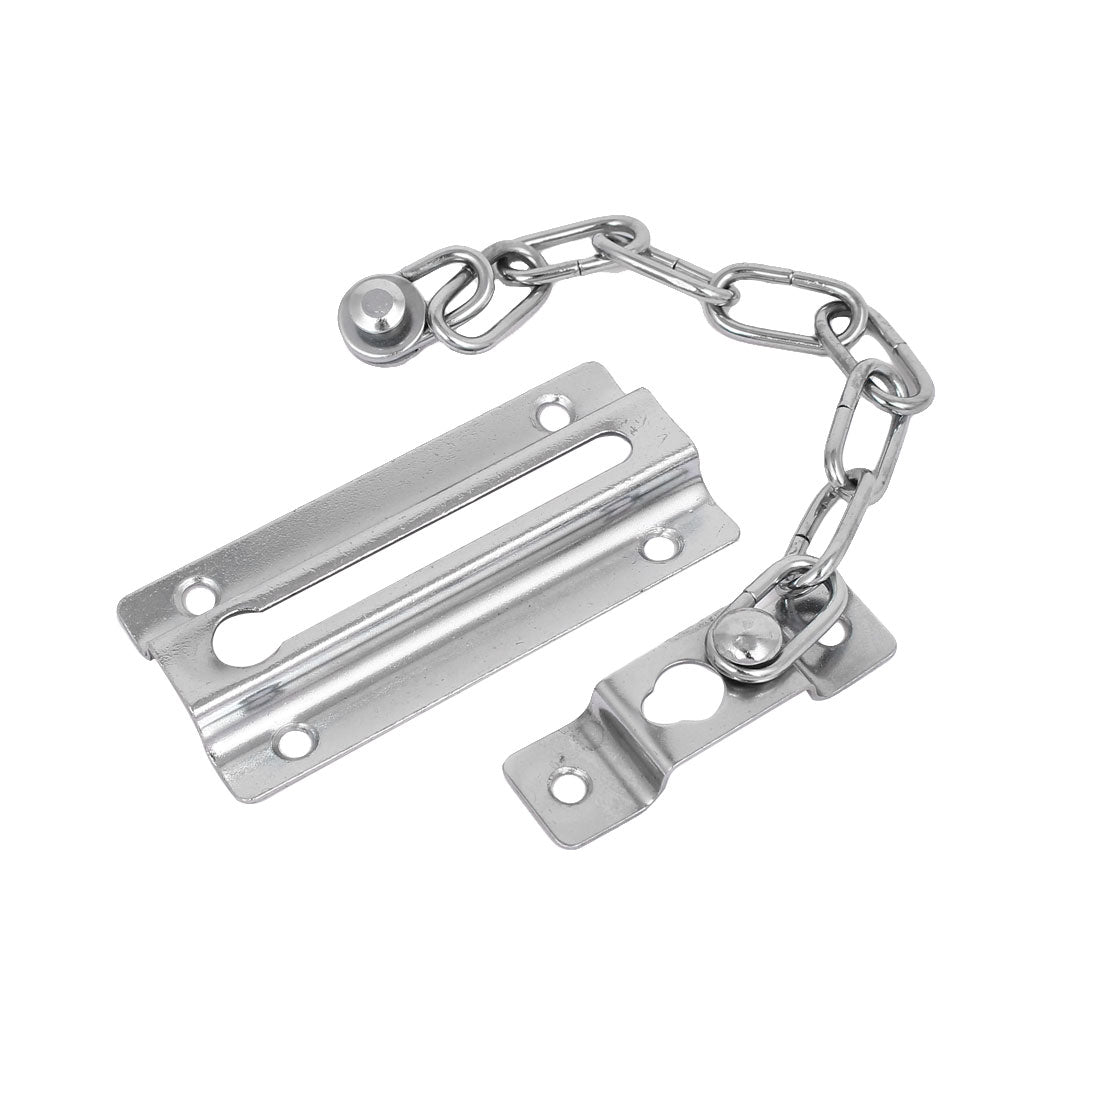 uxcell Uxcell Home Store Security Slide Bolt Door Chain Lock Silver Tone 260mm Length